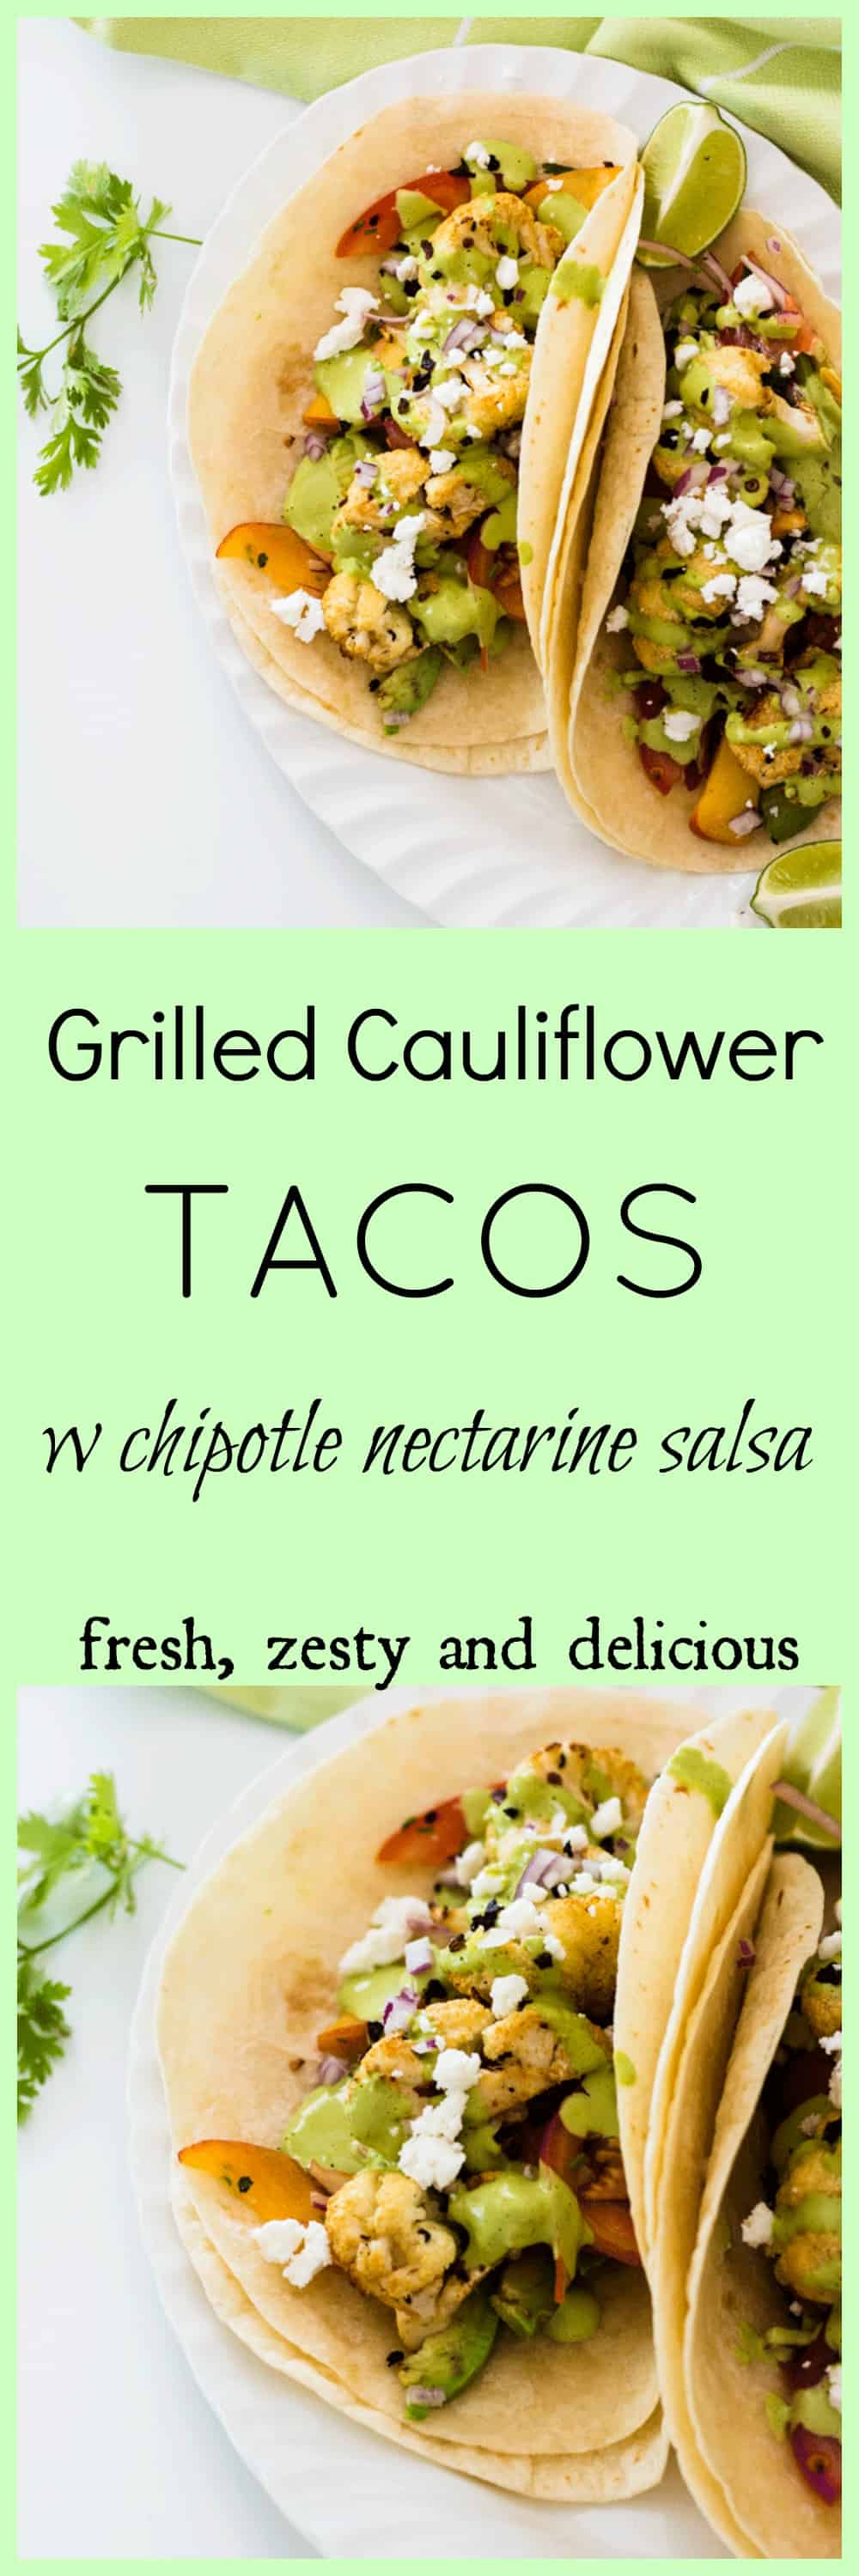 Cauliflower Grilled Tacos with Chipotle Nectarine and Lime Salsa. A little bit zesty, a little bit spicy and a whole lot of yum. Perfect for the next summer BBQ.